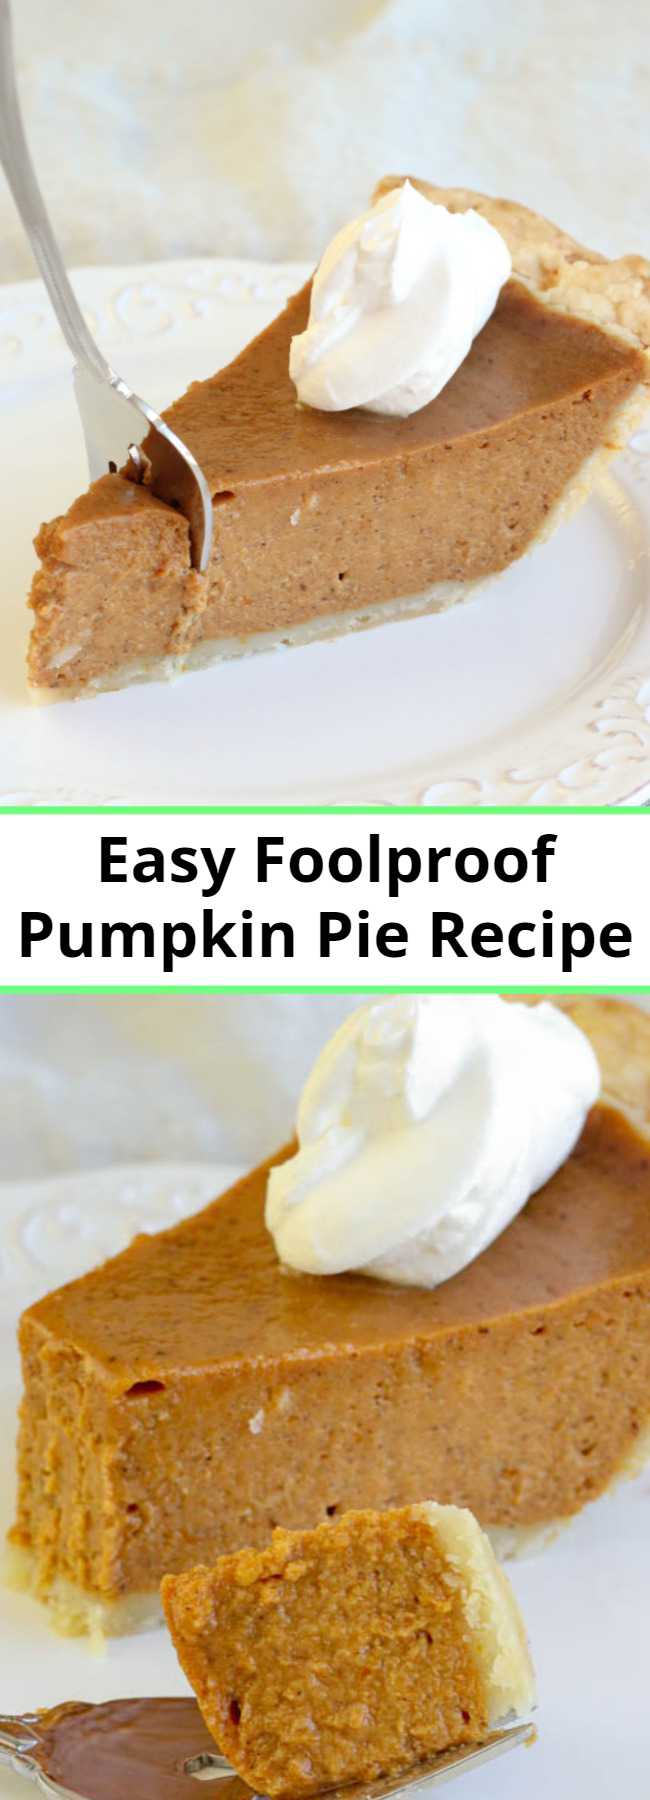 Easy Foolproof Pumpkin Pie Recipe - The best and easiest Pumpkin Pie recipe I've tried! It's creamy with the perfect amount of spice! This Pumpkin Pie will soon be a family favorite!